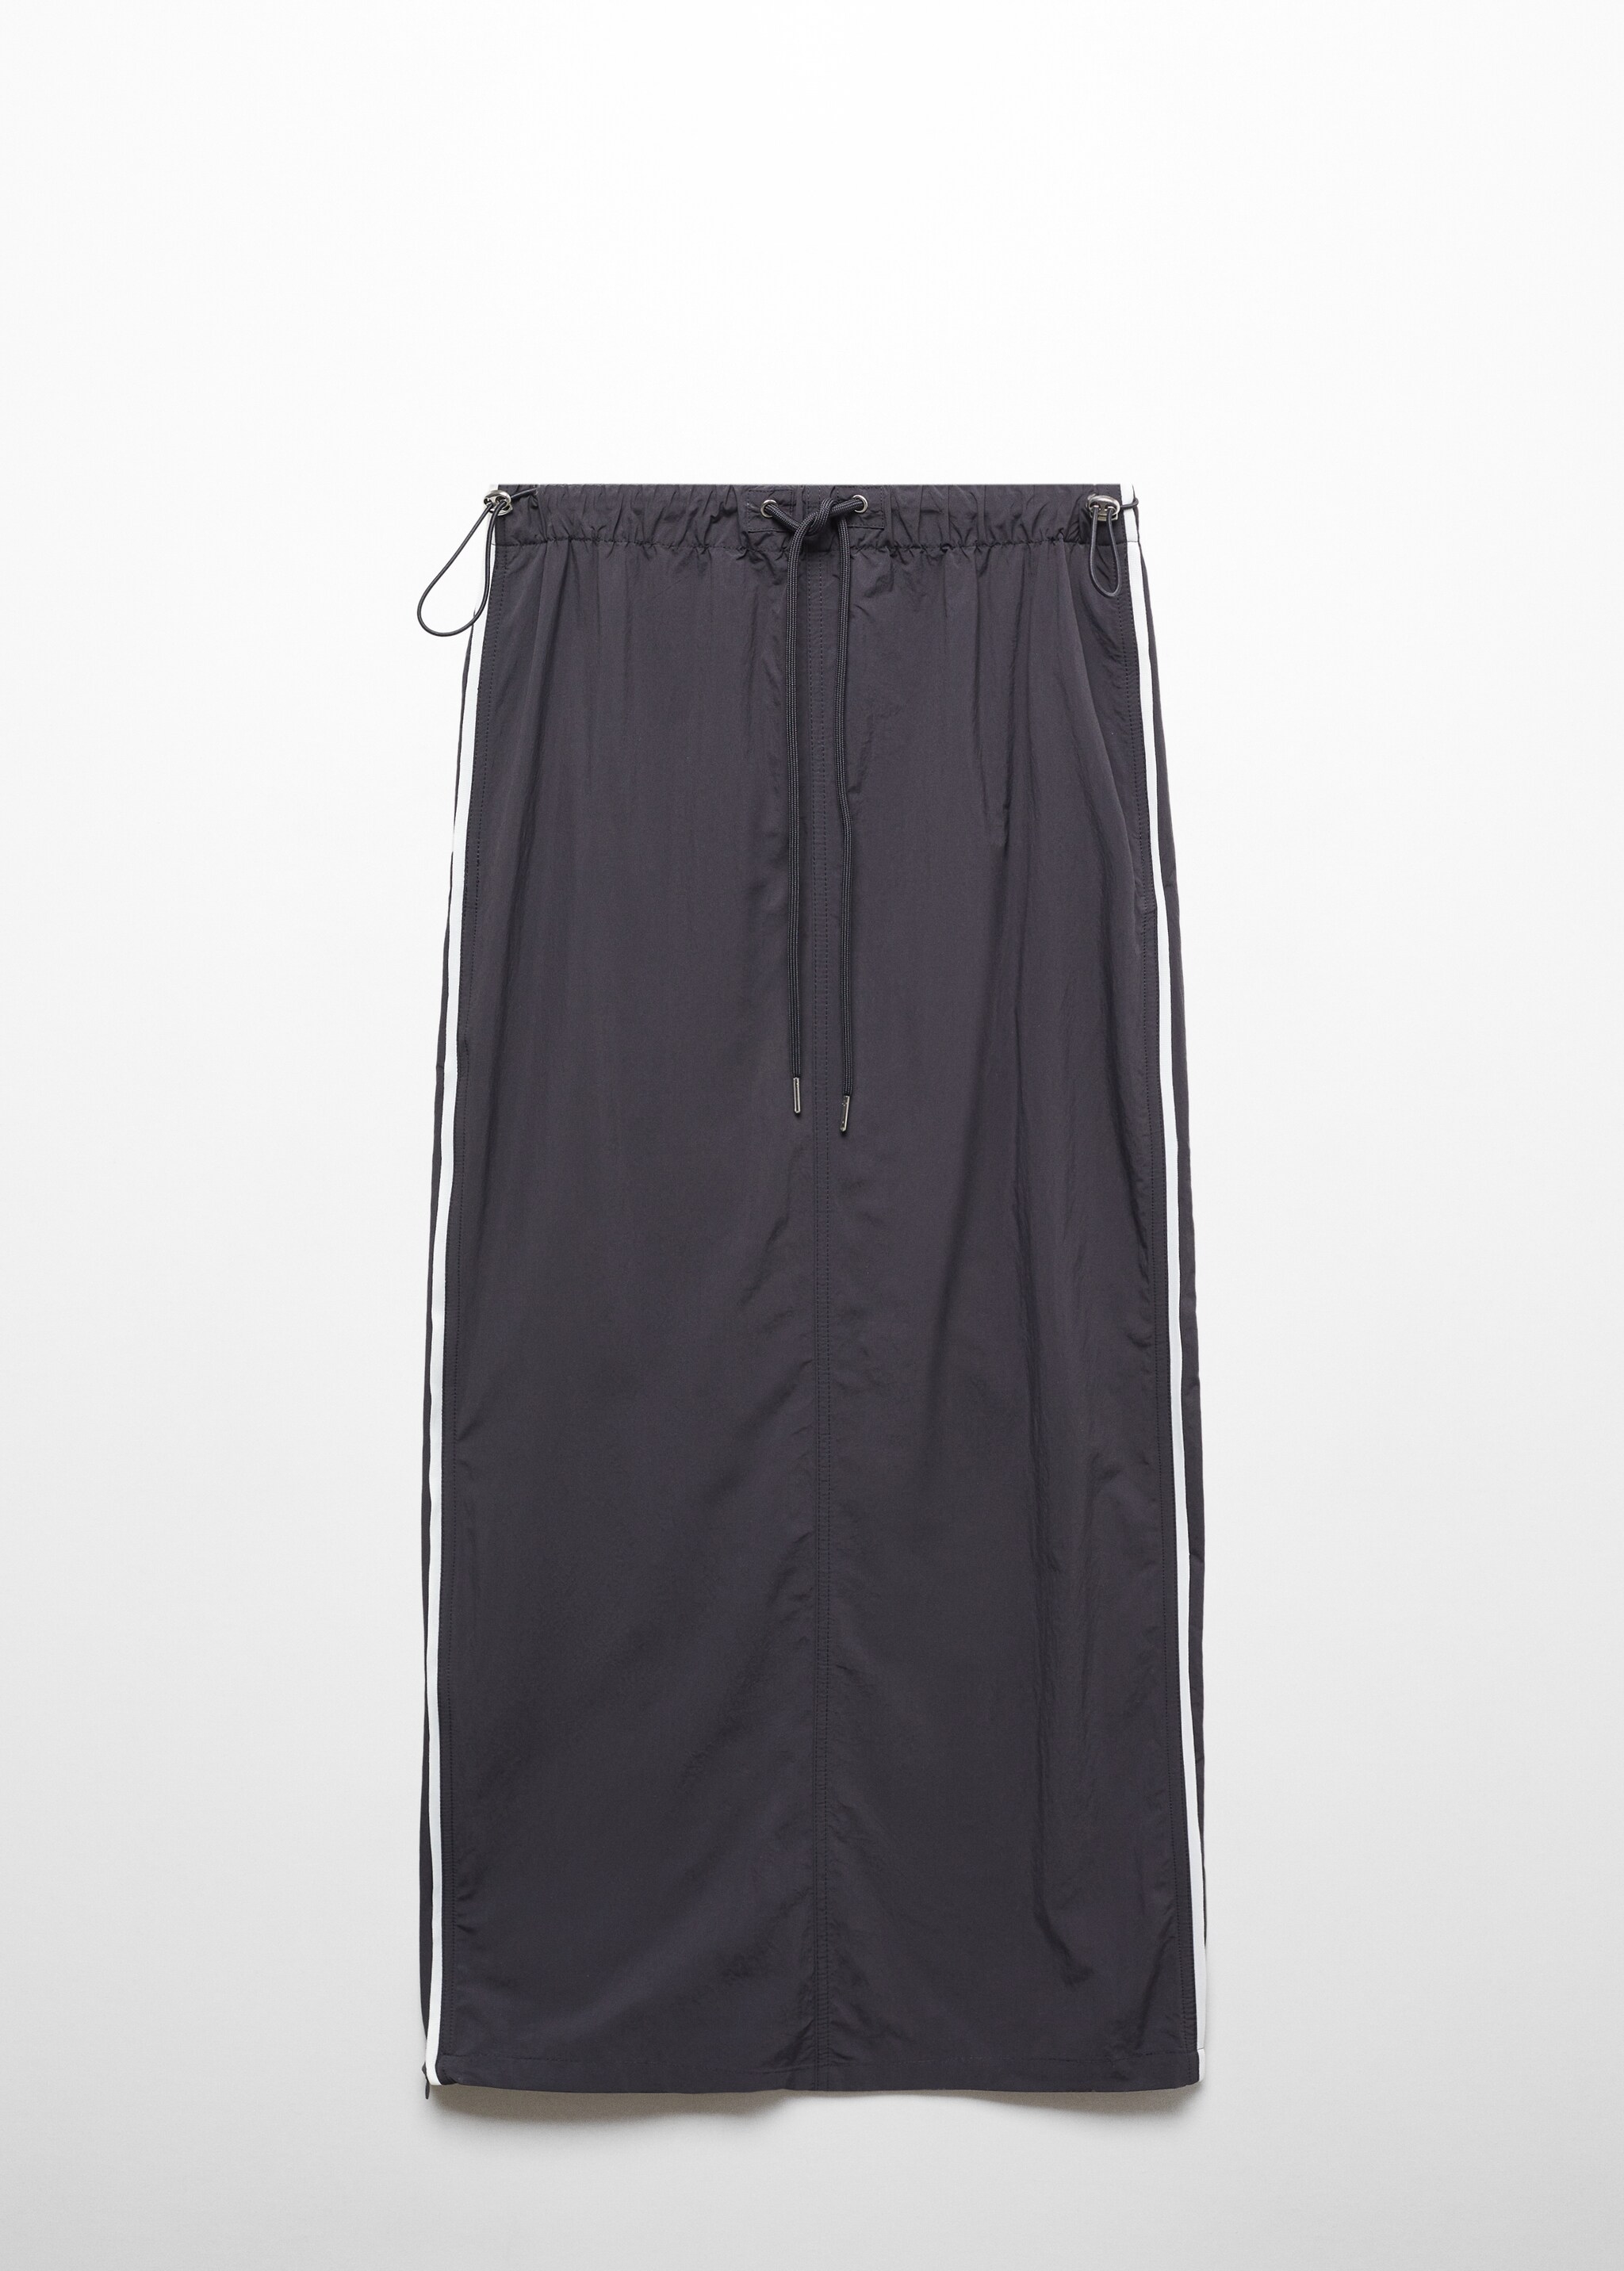 Parachute skirt with side zipper - Article without model